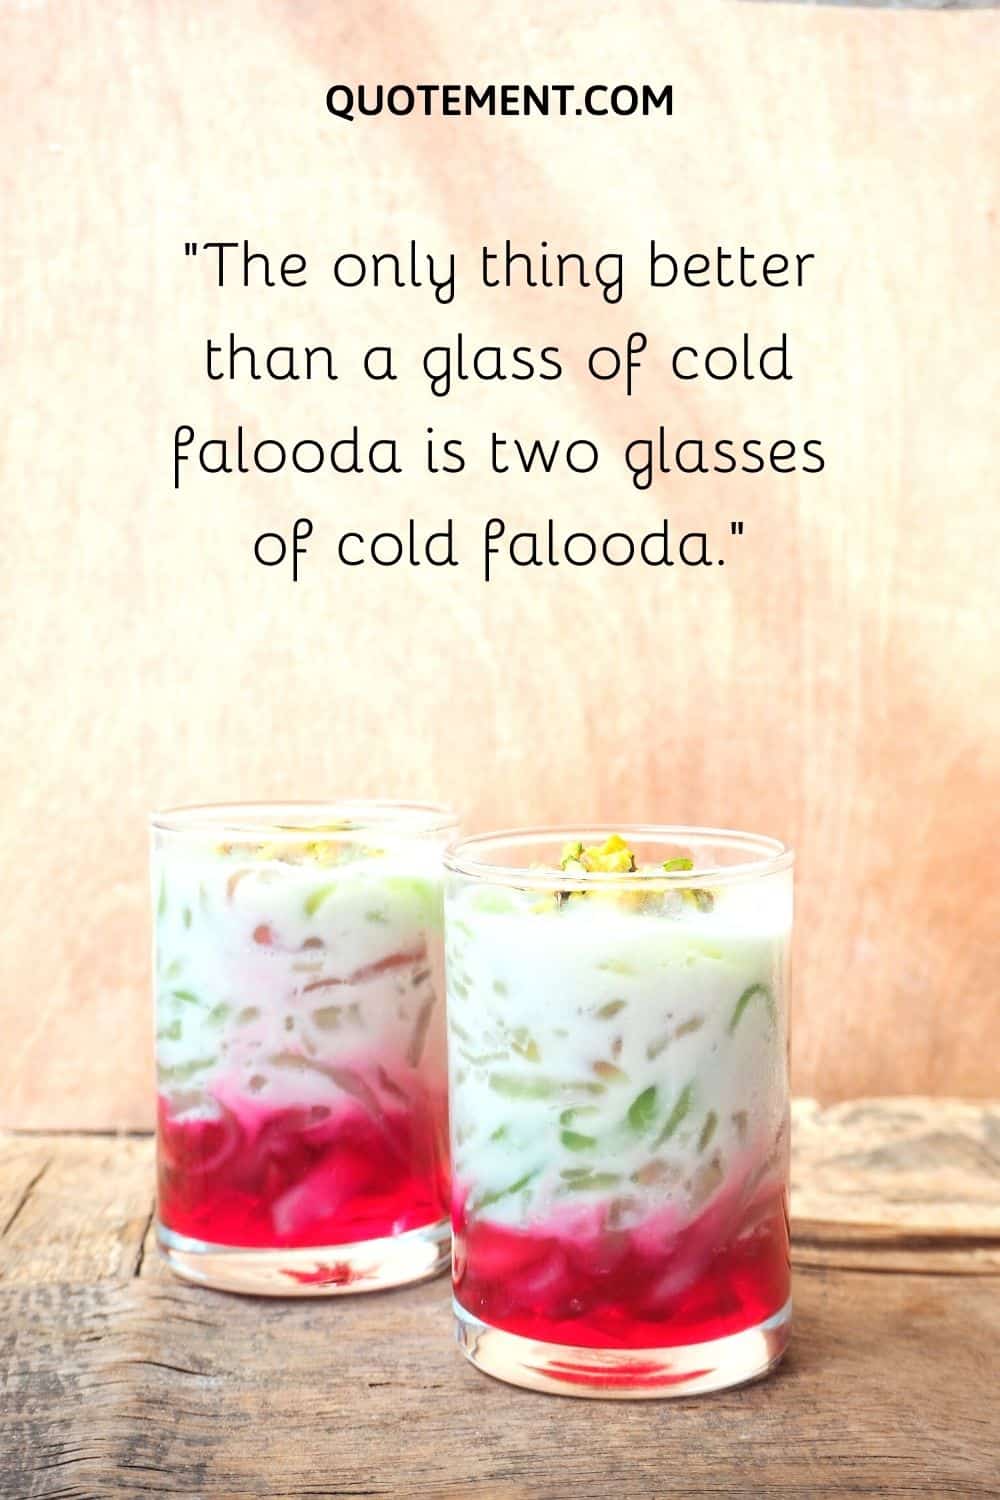 The only thing better than a glass of cold falooda is two glasses of cold falooda